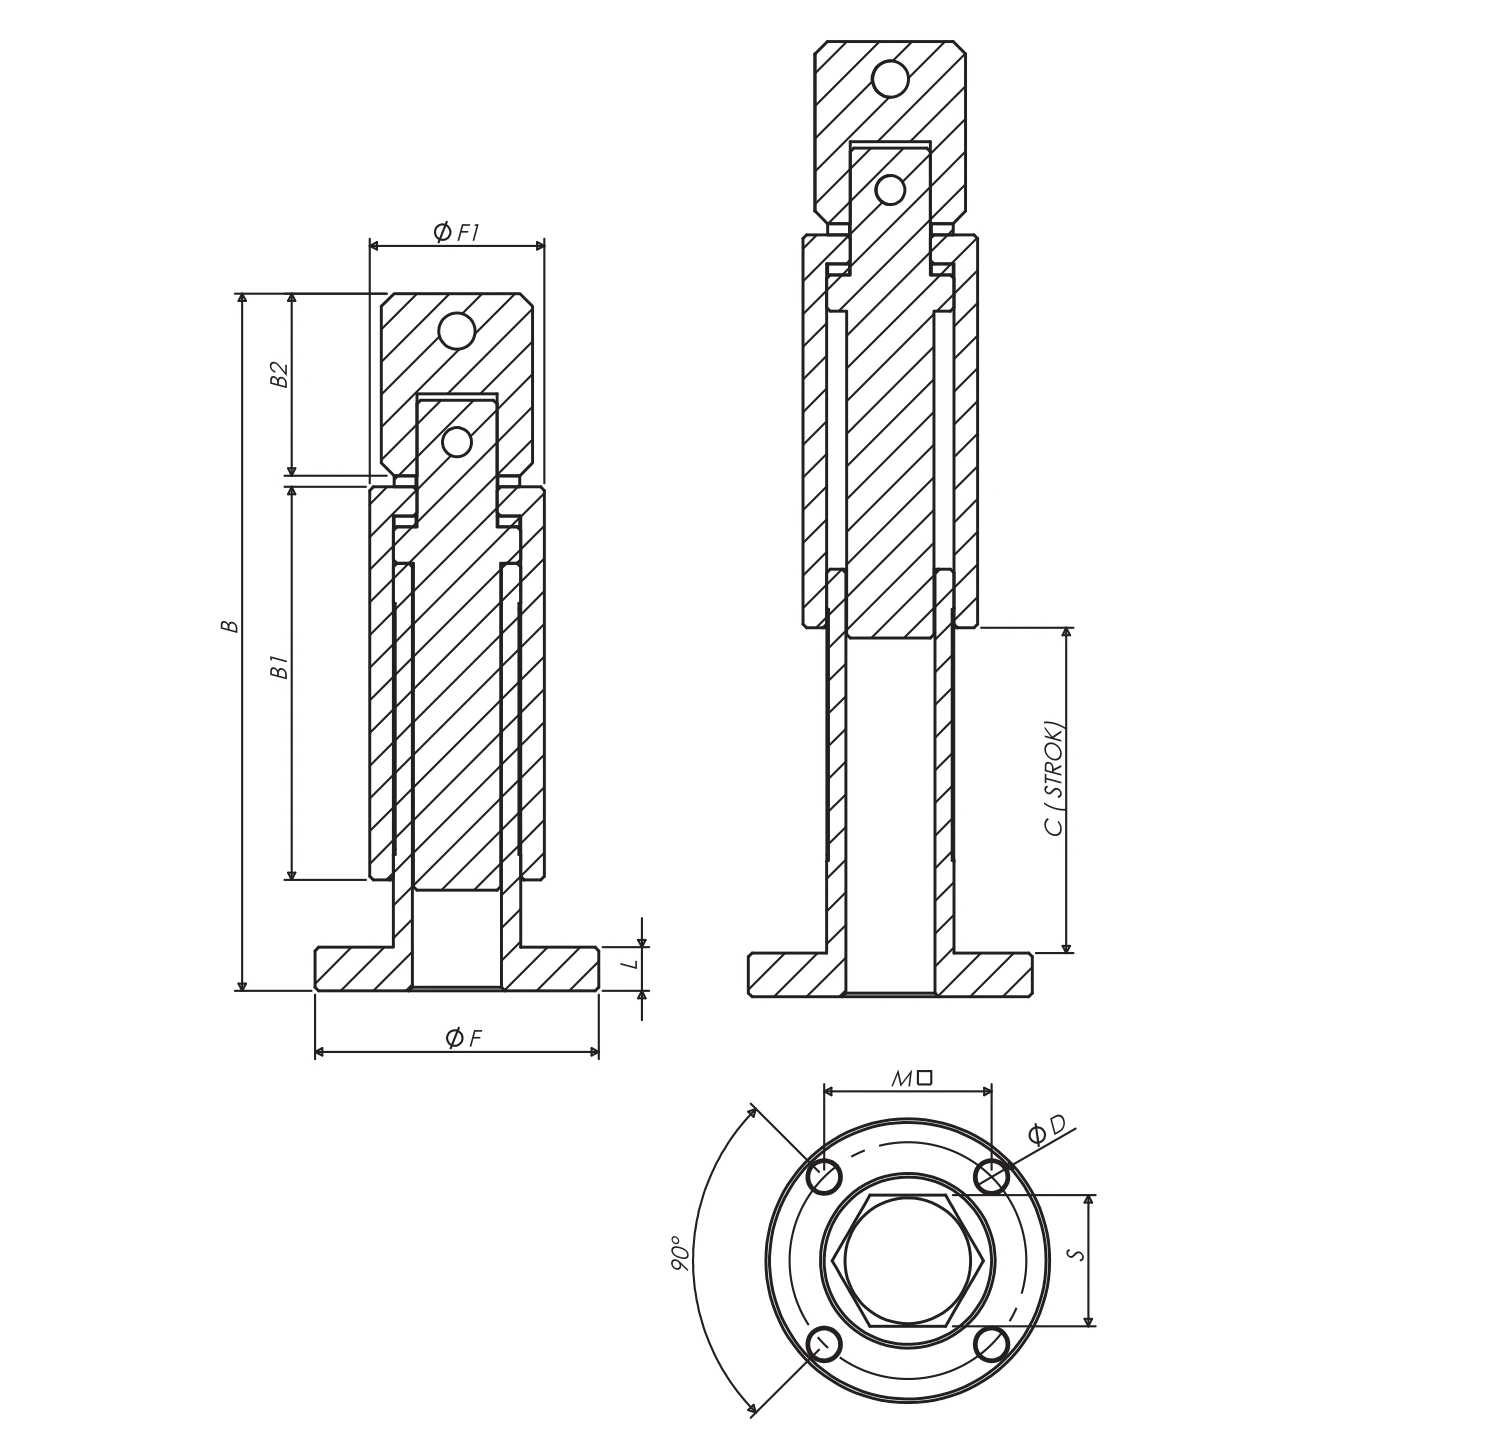 M80 Heavy type screw Clamp Technical drawing